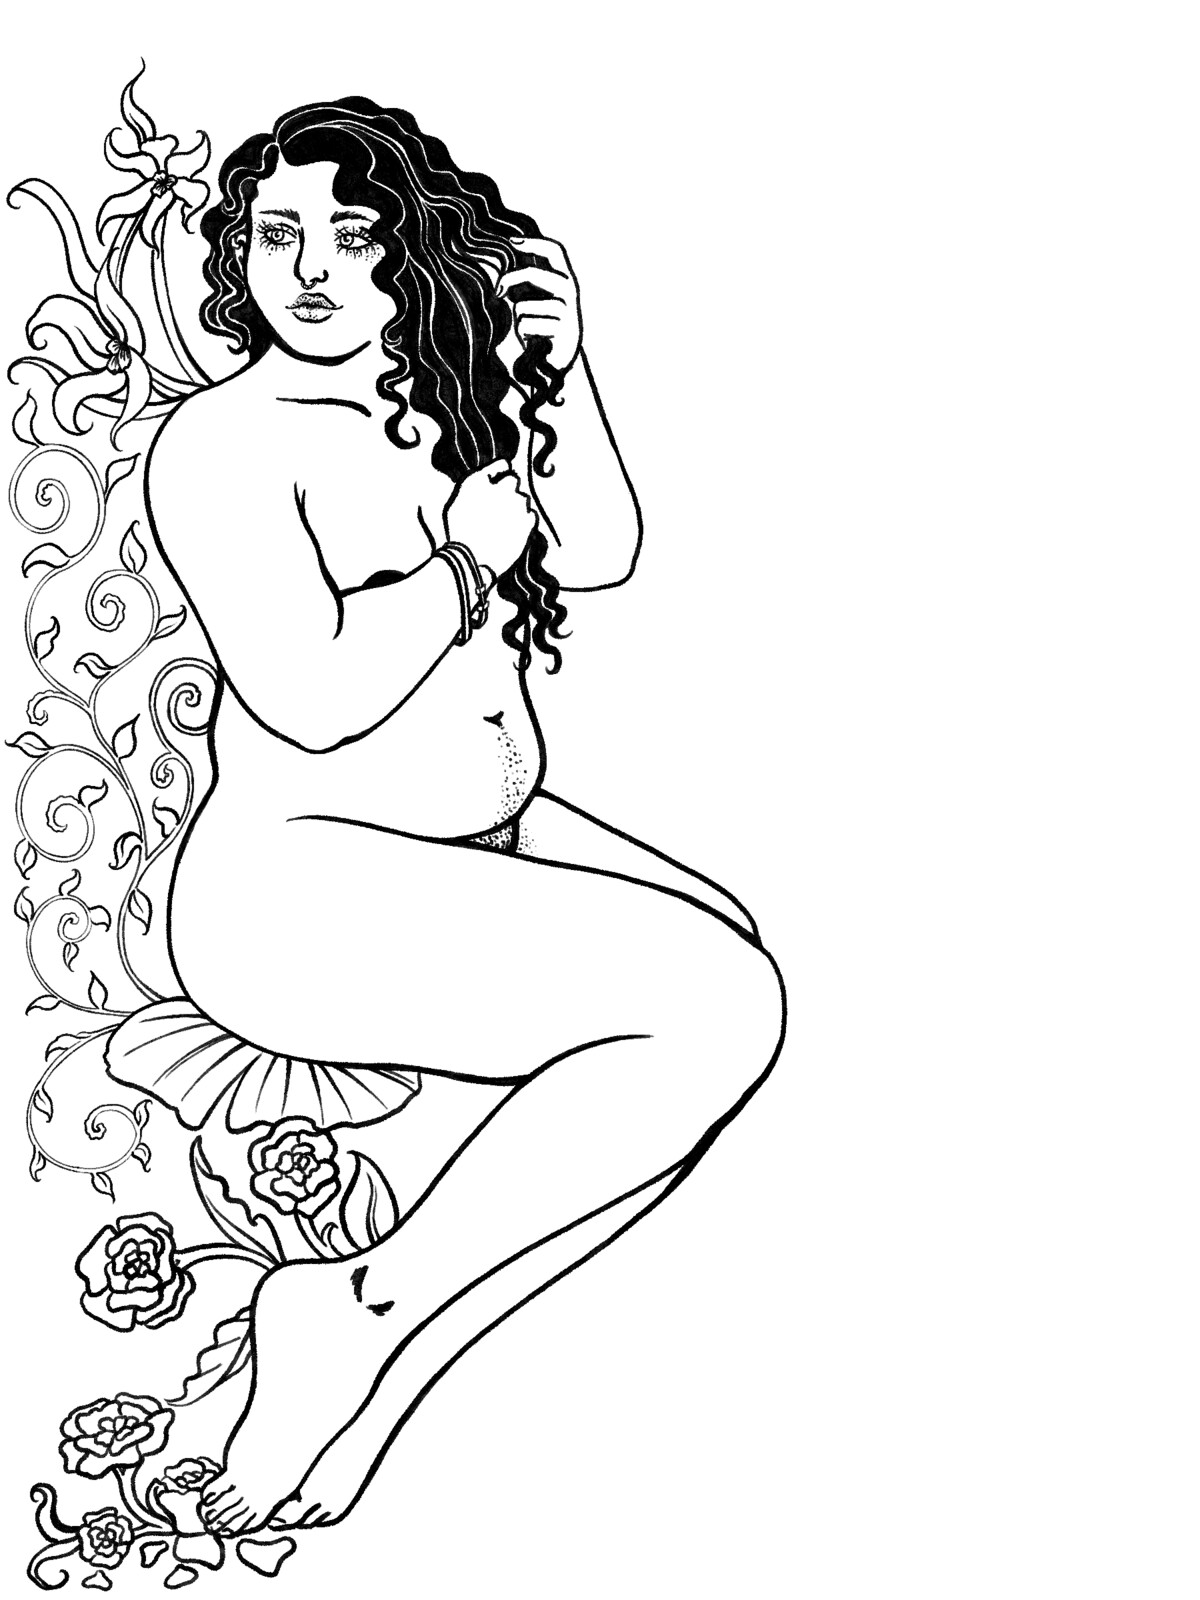 A nymph sits on a lily pad surrounded by vines and roses, playing with her dark curly hair